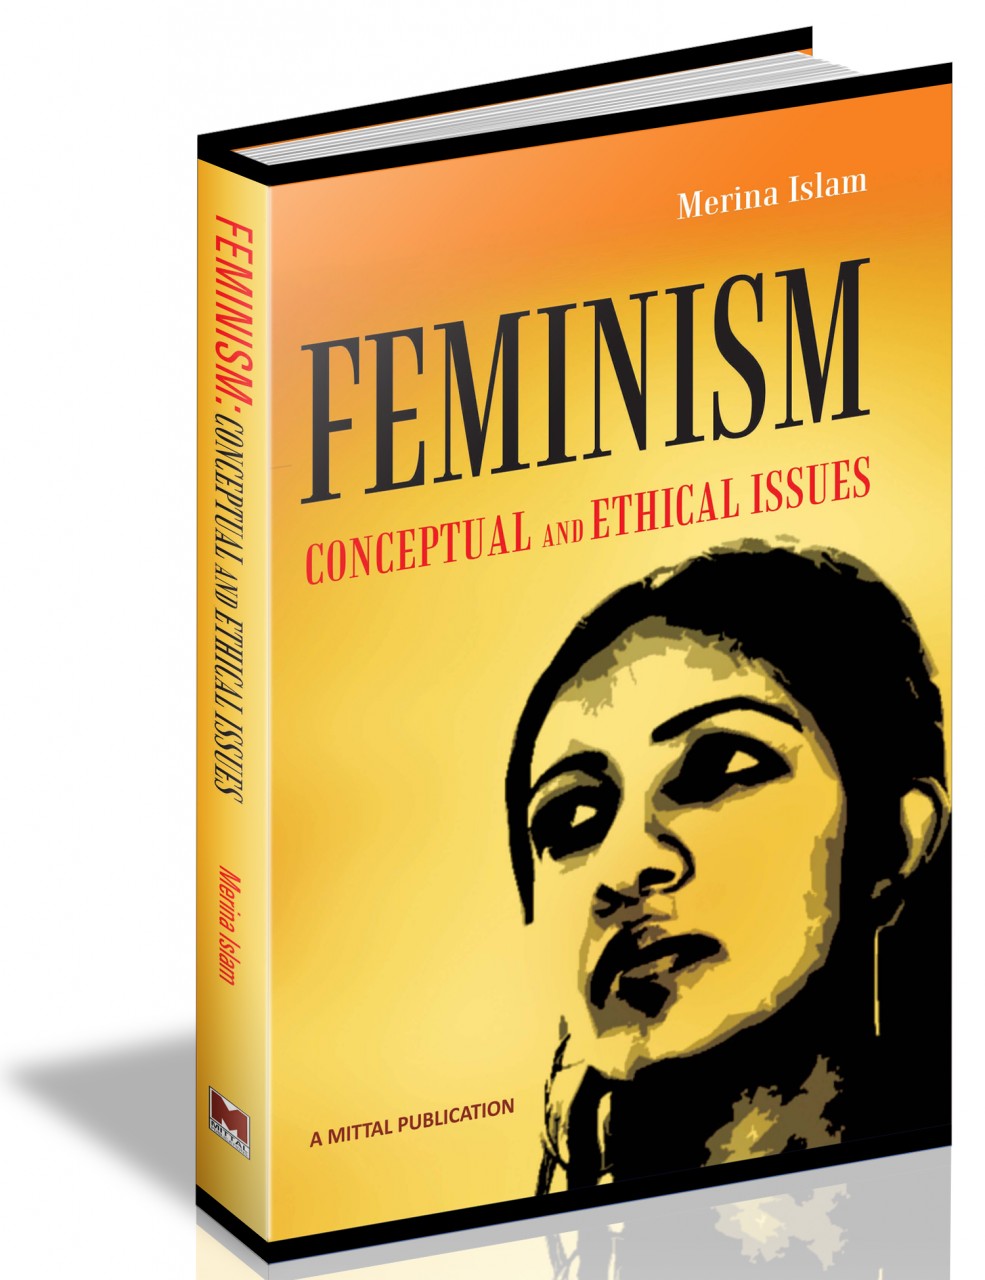 Feminism - Conceptual and Ethical Issues